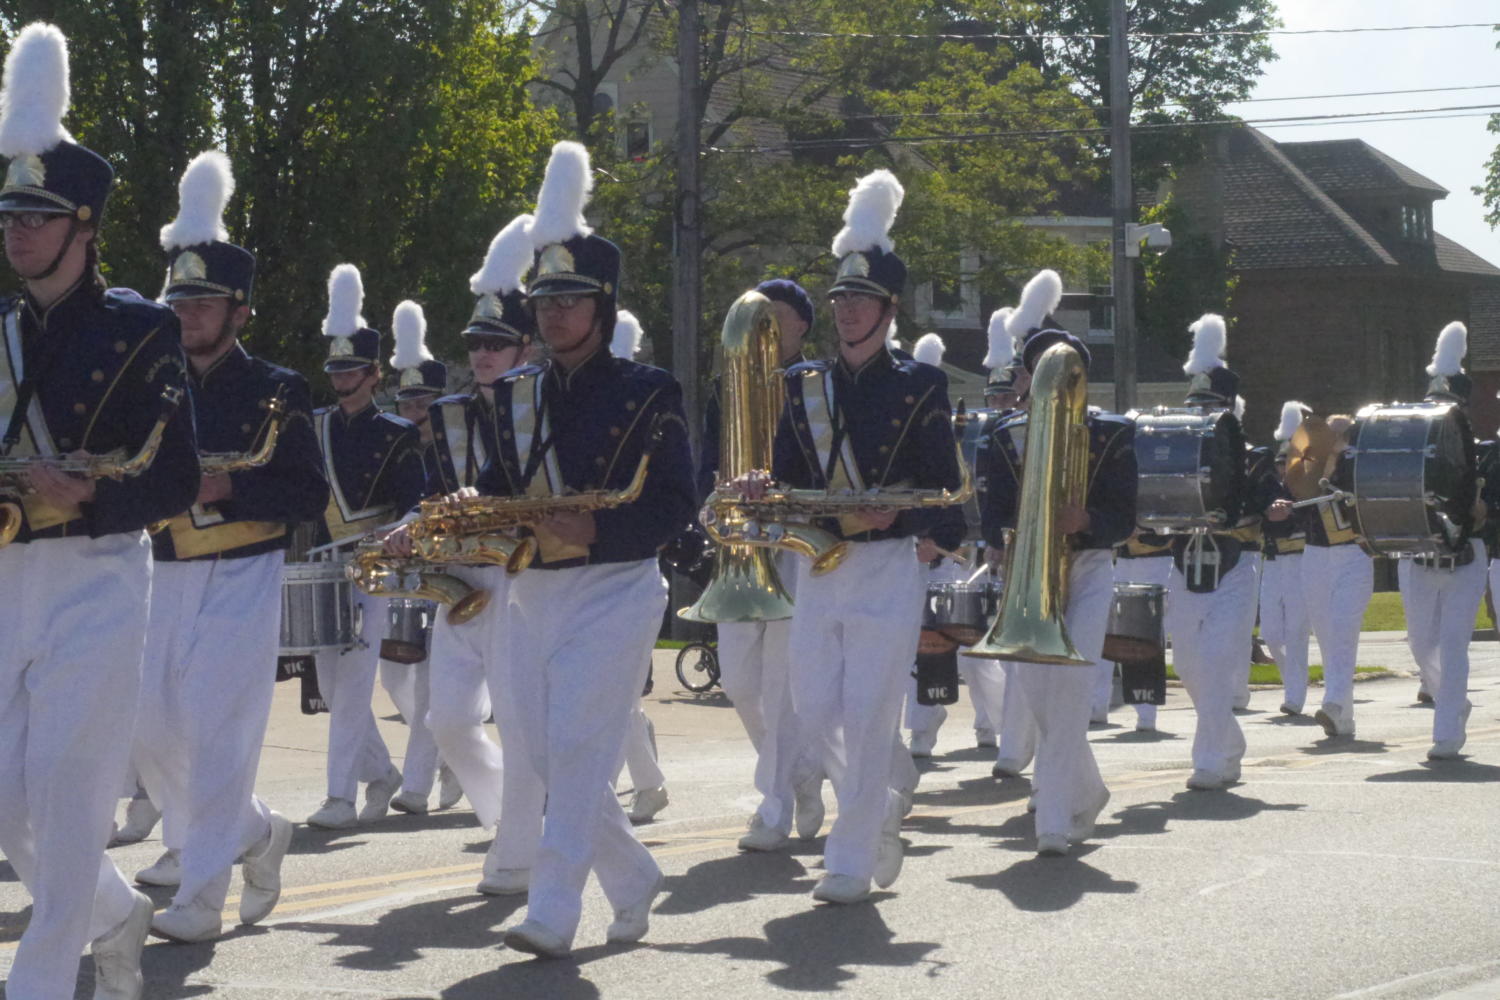 The marching band parades down Washington street for the Memorial Day parade.